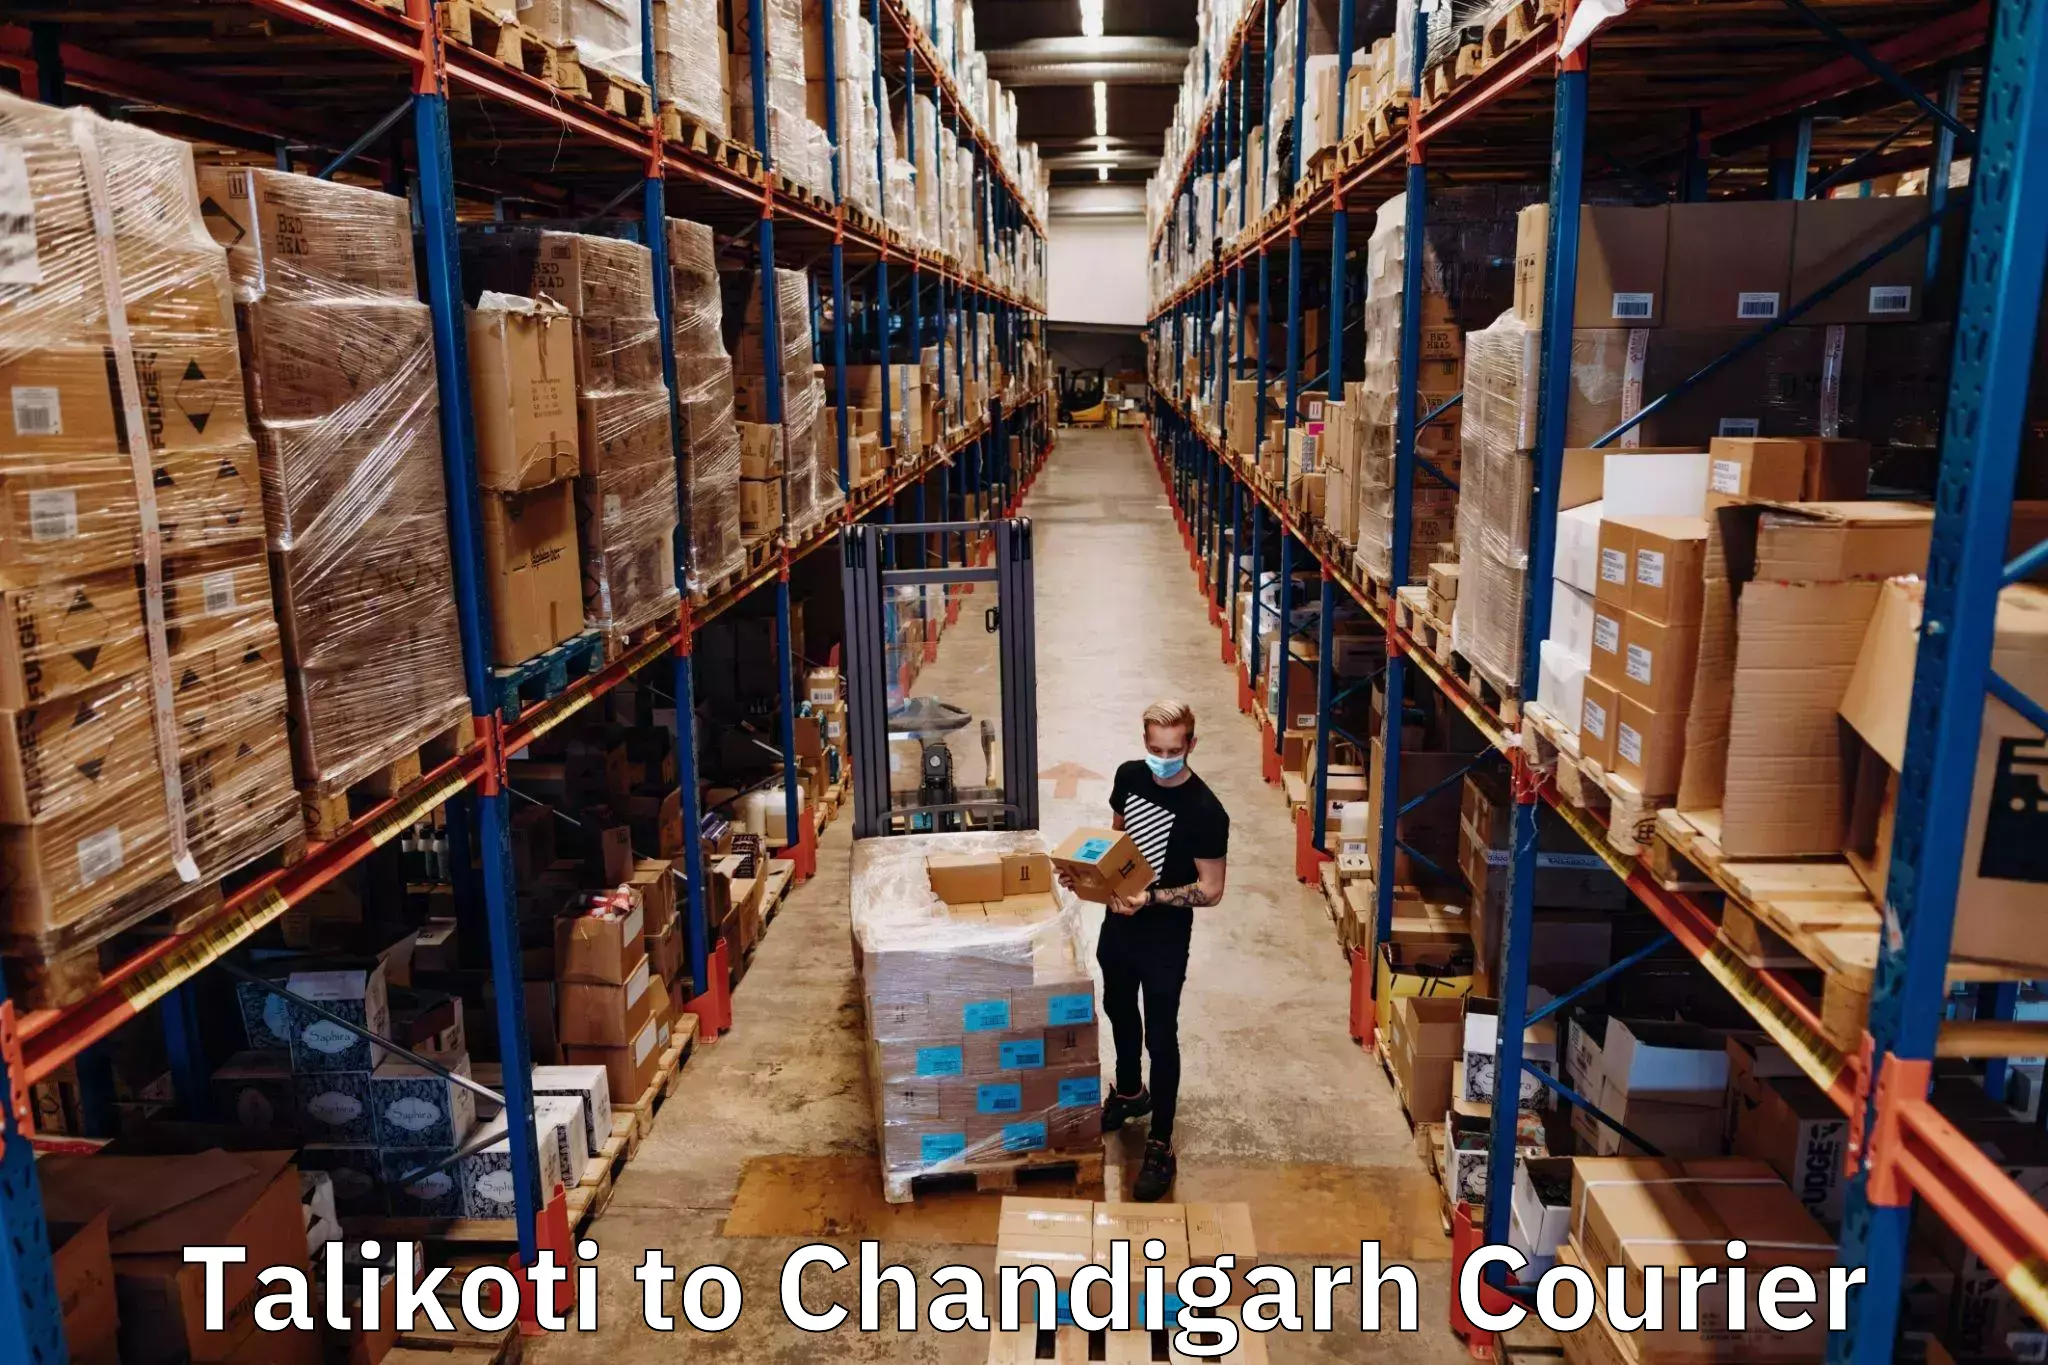 Courier service booking Talikoti to Chandigarh